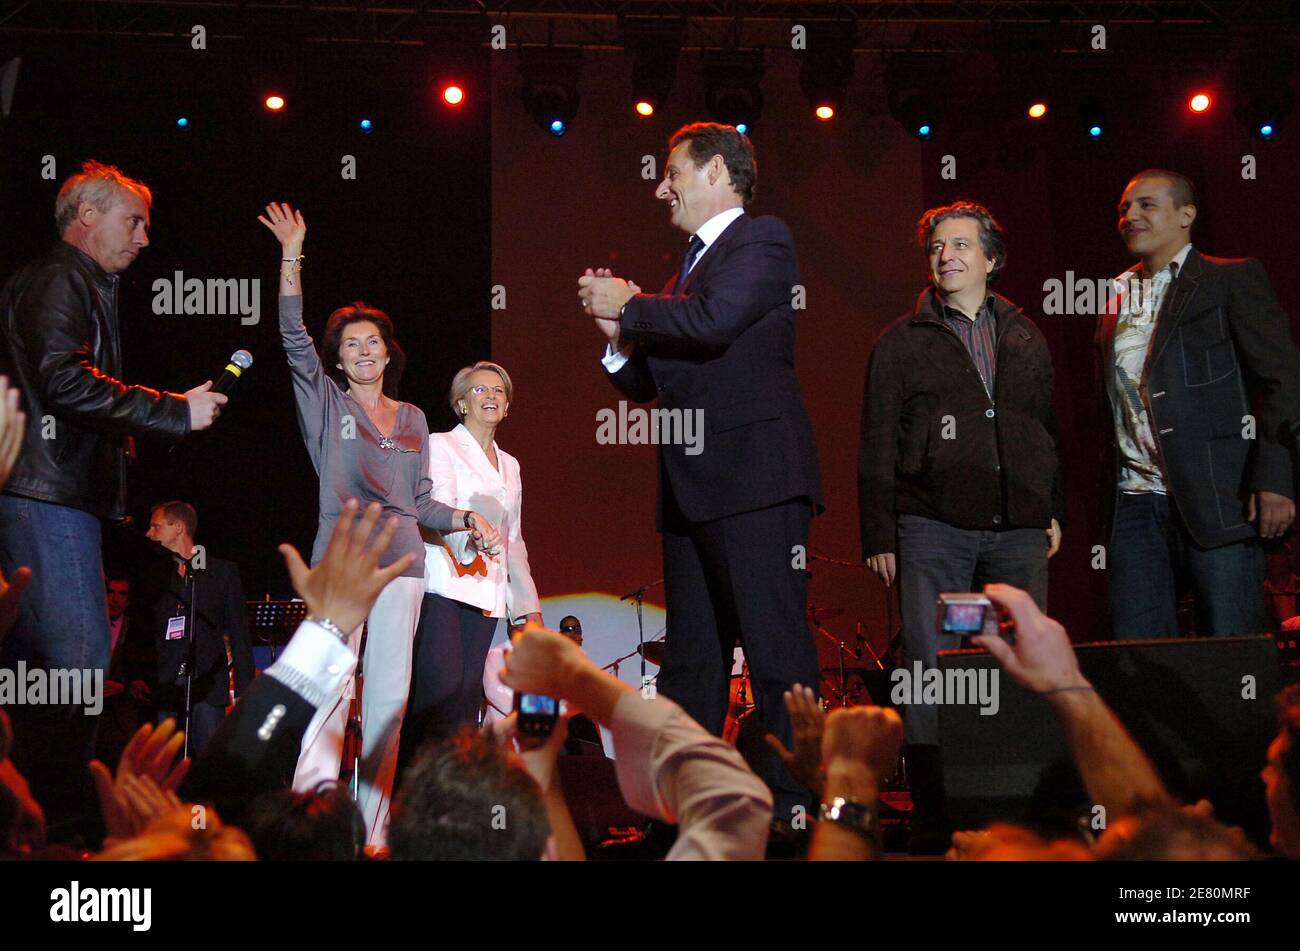 France's newly-elected president Nicolas Sarkozy addresses his supporters alongside his wife Cecilia, Defense Minister Michele Alliot-Marie, actor Christian Clavier and singer Faudel, Place de la Concorde in Paris, France, May 6, 2007. French voters elected reform-minded Nicolas Sarkozy as their new president on Sunday, giving him a comfortable winning margin, preliminary official results and projections from four polling agencies showed. With more than half of the vote counted, Sarkozy was scoring just over 53 percent to a little more than 46 percent for Socialist Segolene Royal. Polling agen Stock Photo